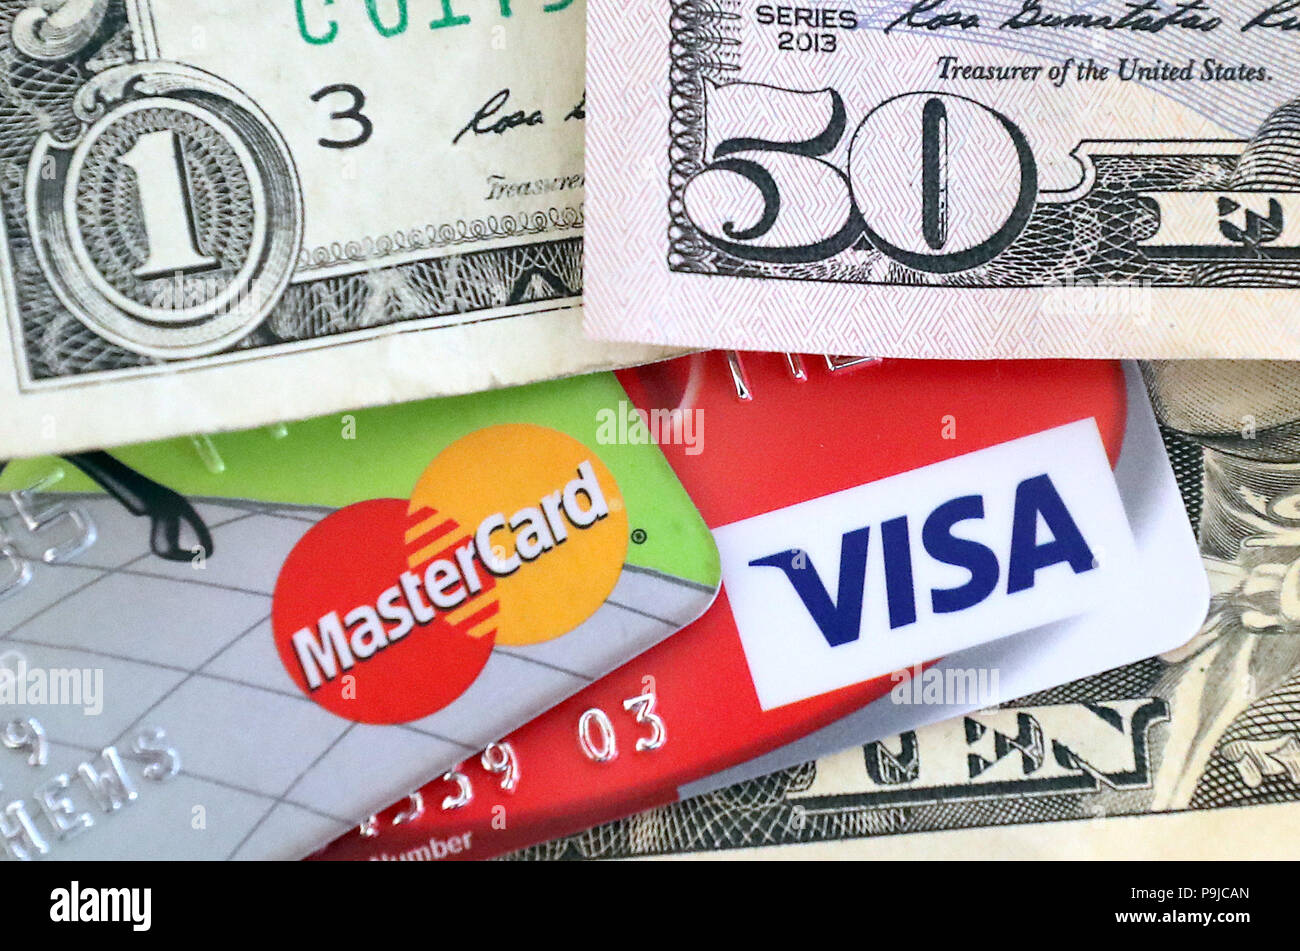 A Mastercard credit and Visa debit cards surrounded by US Dollars Stock Photo